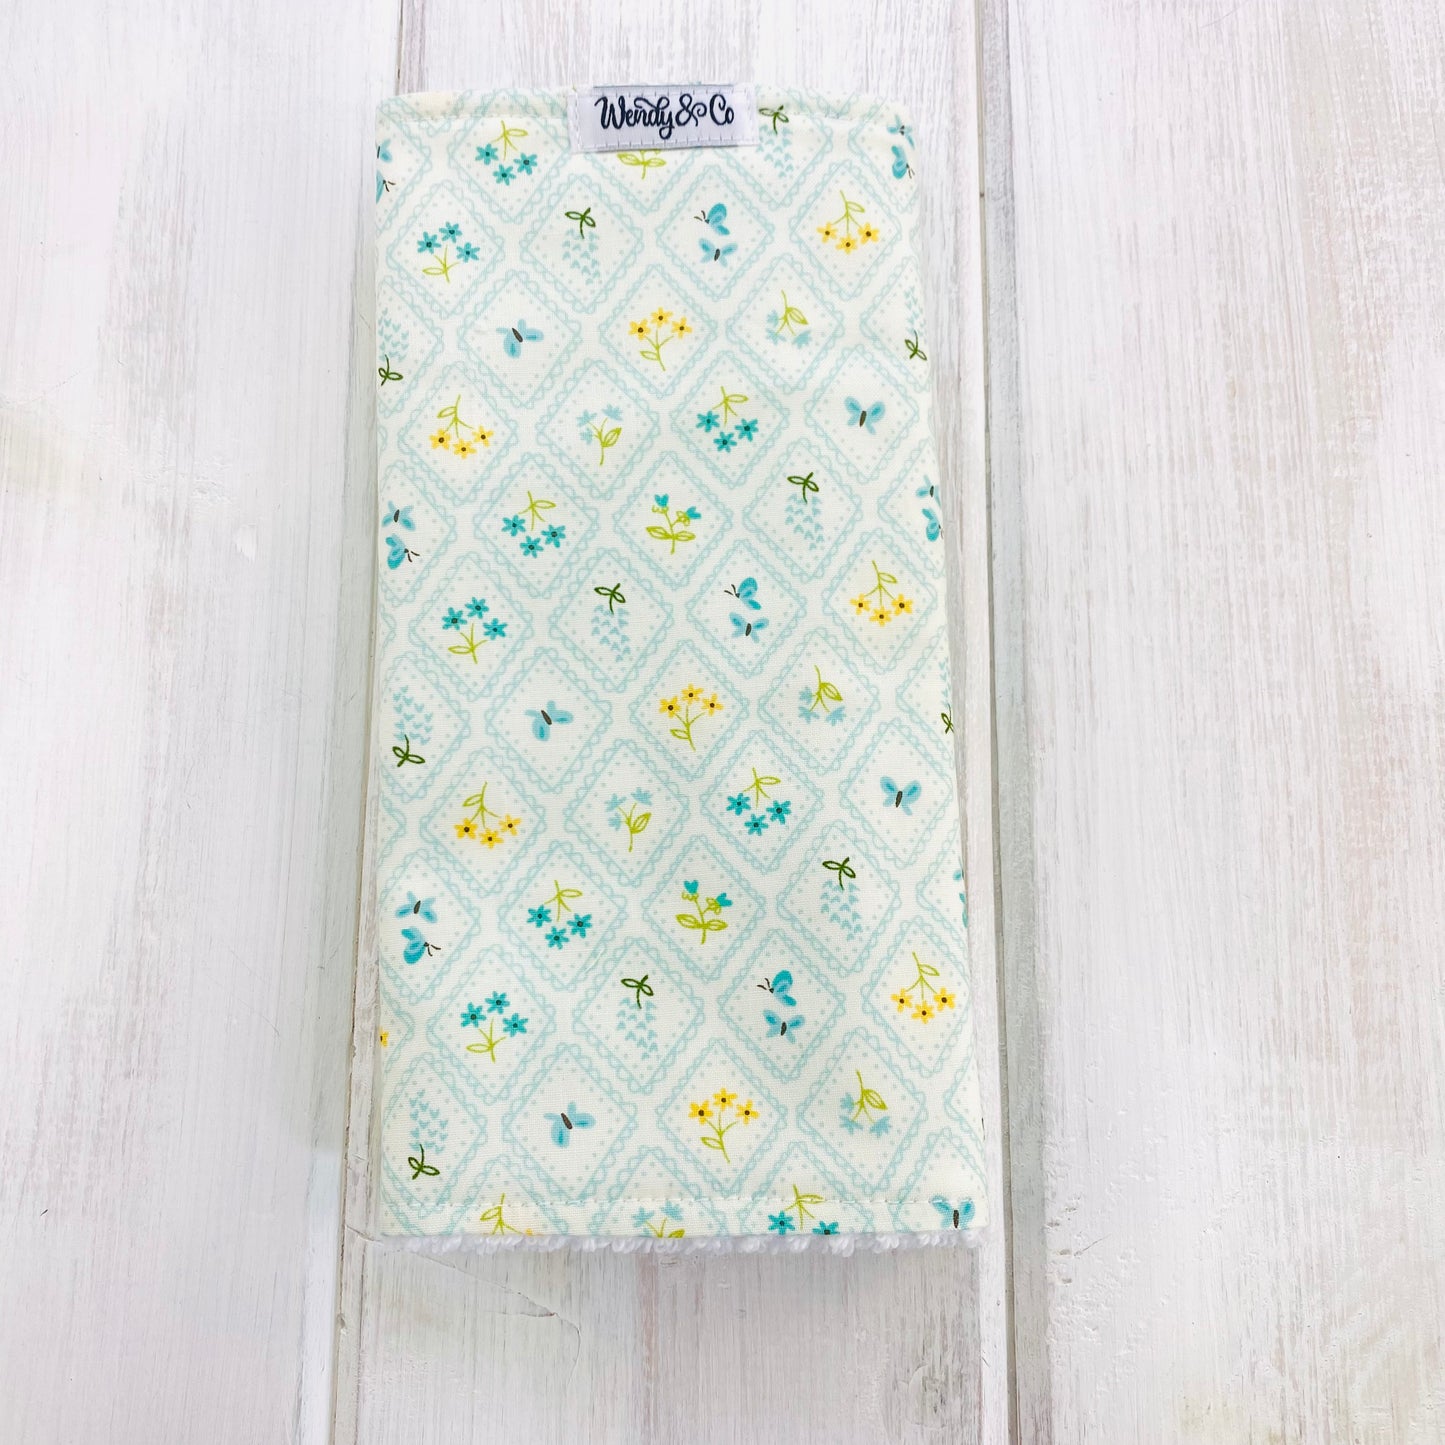 Baby burp cloth in light blue floral with Black-eyed Susan, blue Lupins, and butterflies.